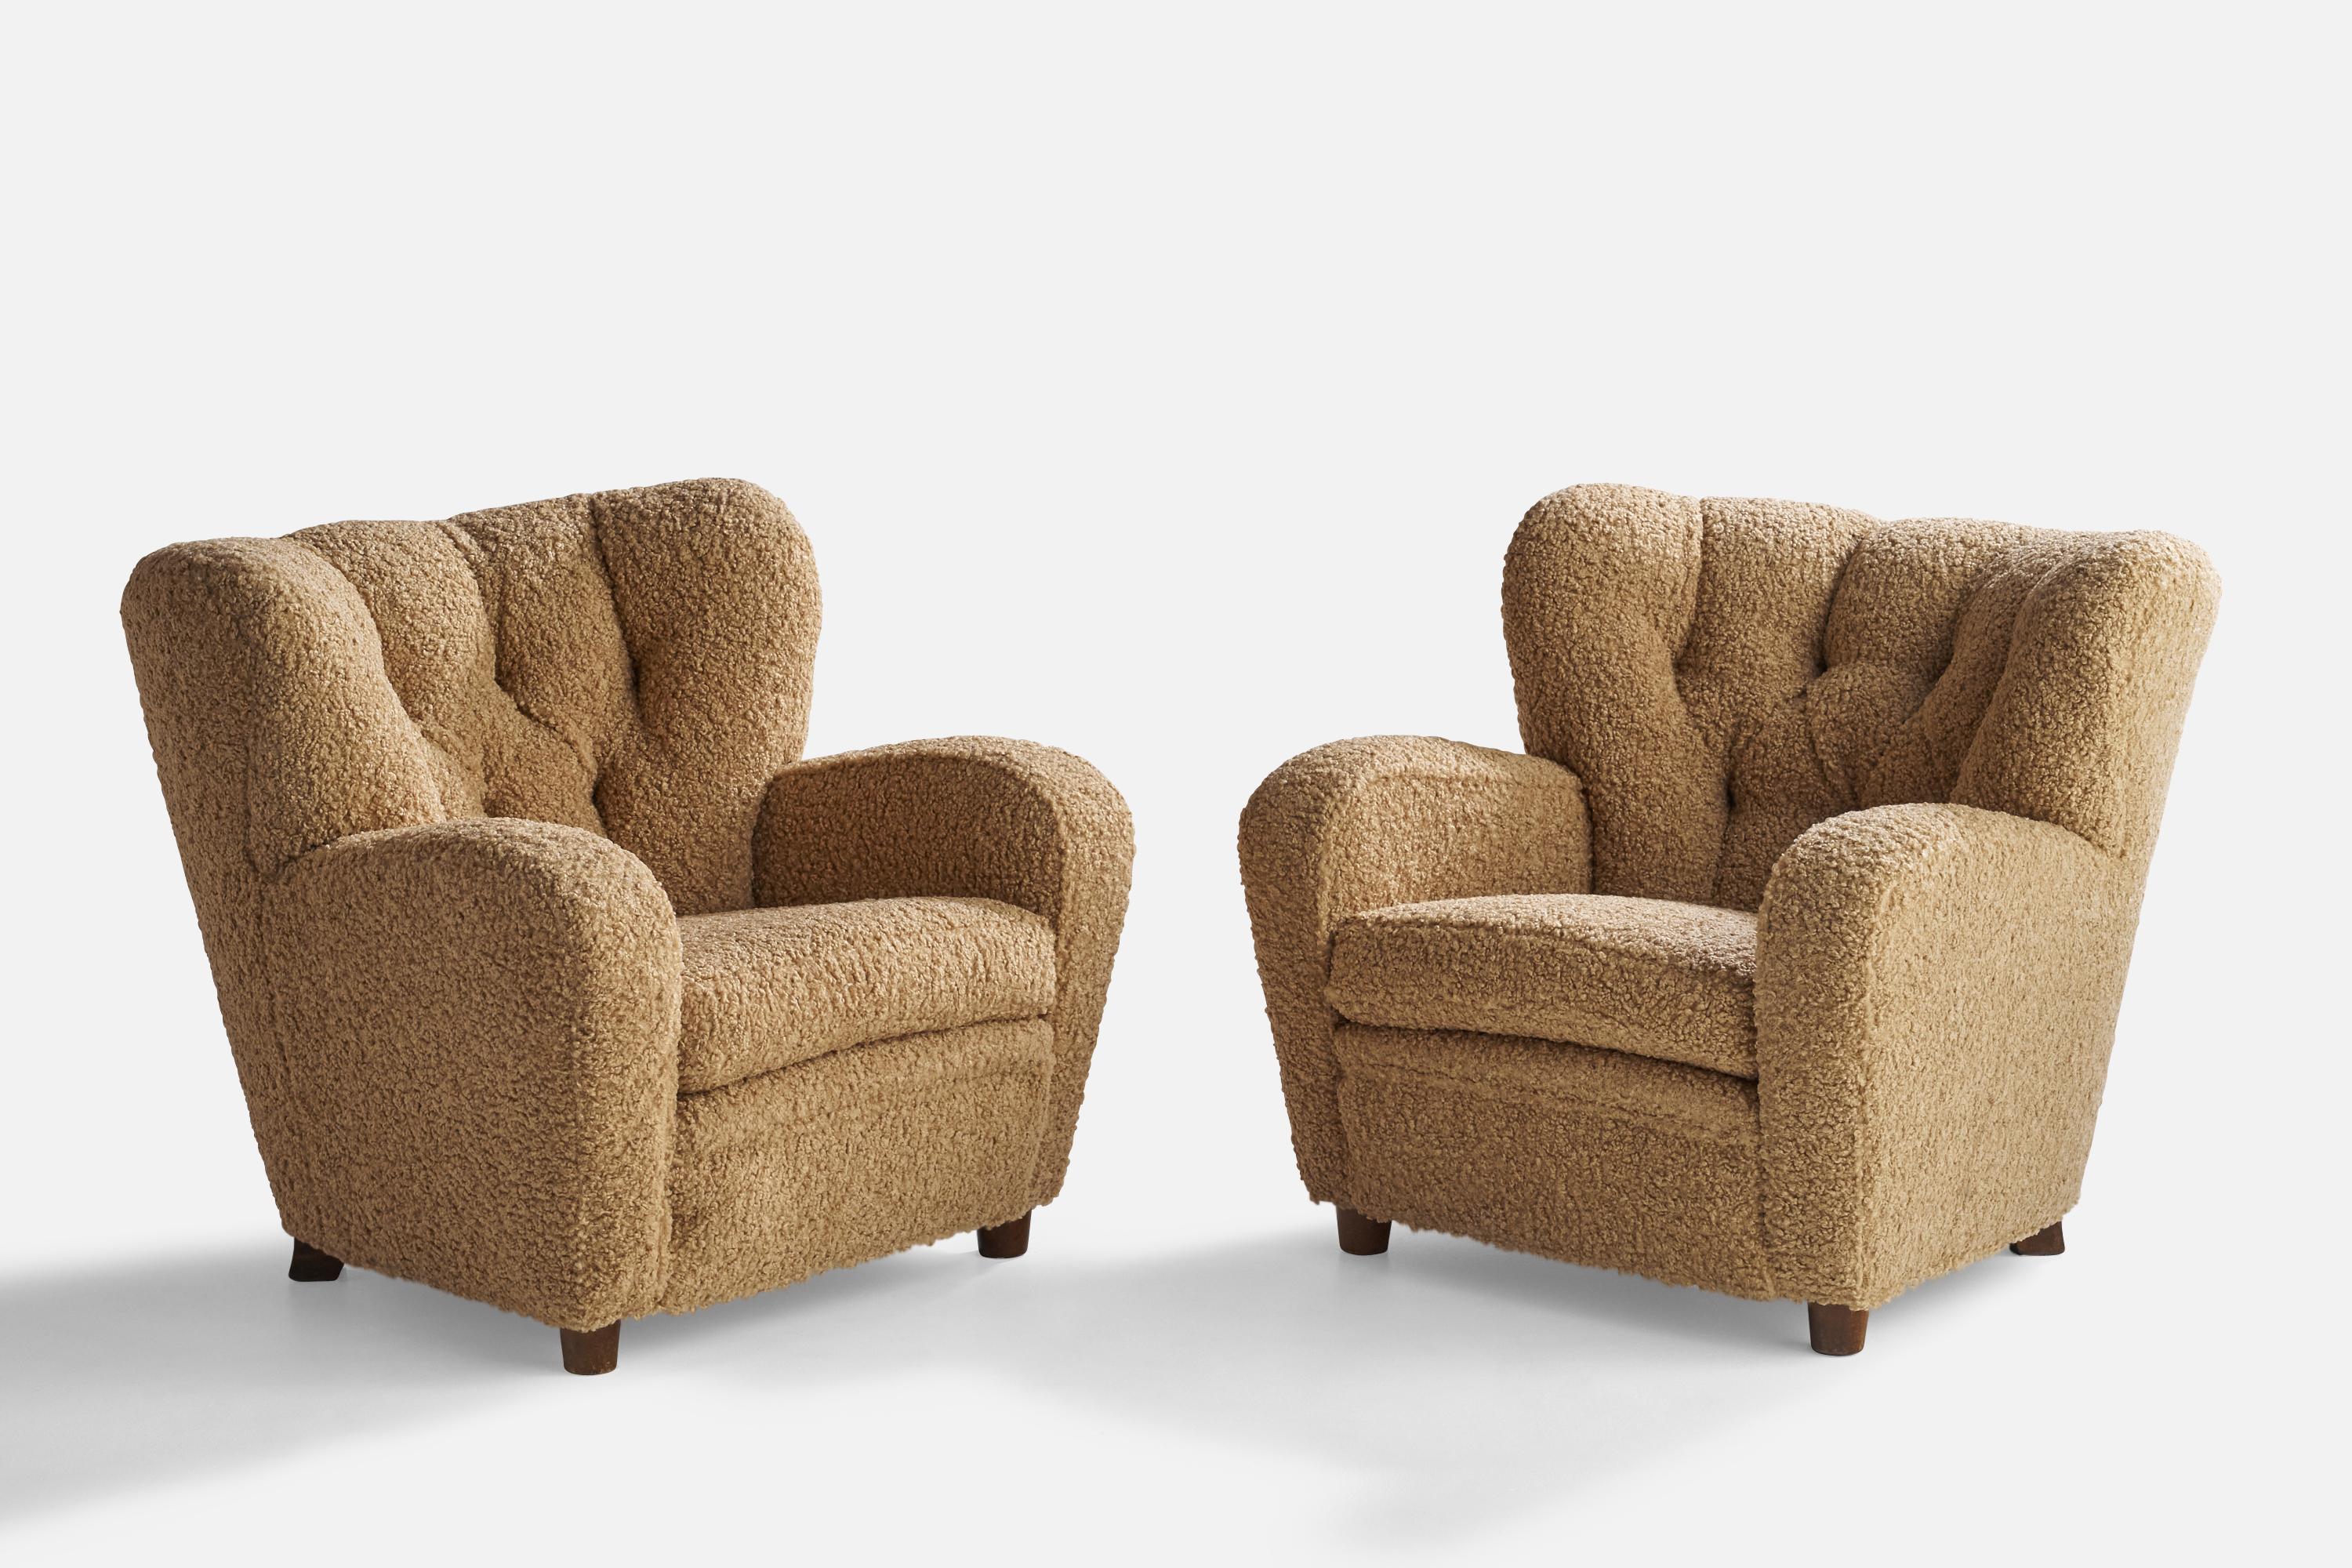 A pair of dark-stained birch and beige bouclé fabric lounge chairs designed and produced in Finland, 1940s.

Seat height 16.5